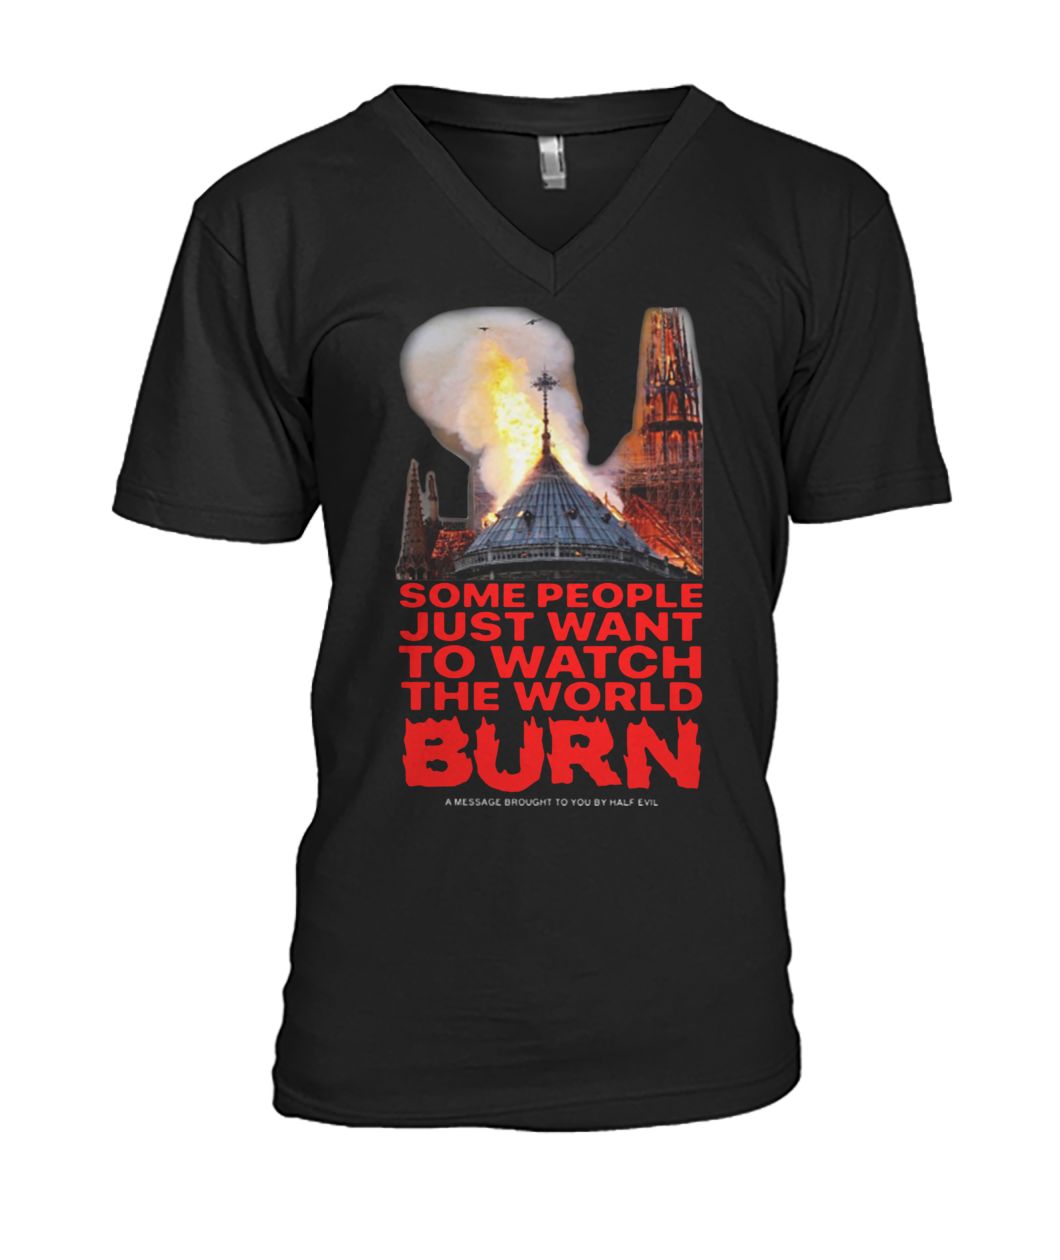 Some people just want to watch the world burn notre-dame de paris mens v-neck